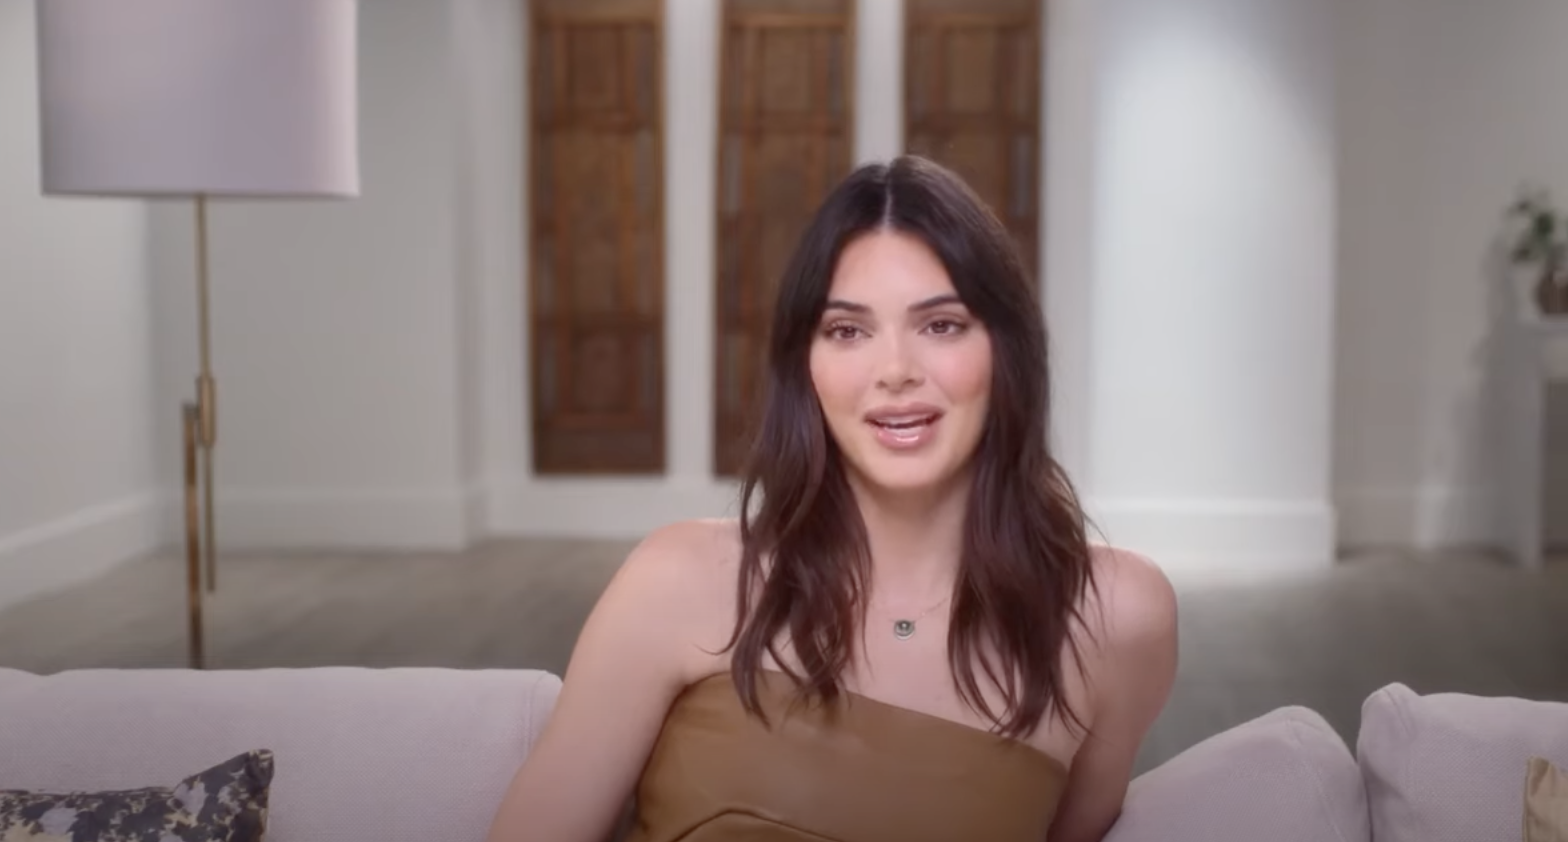 Kendall sitting on a couch and wearing a strapless top